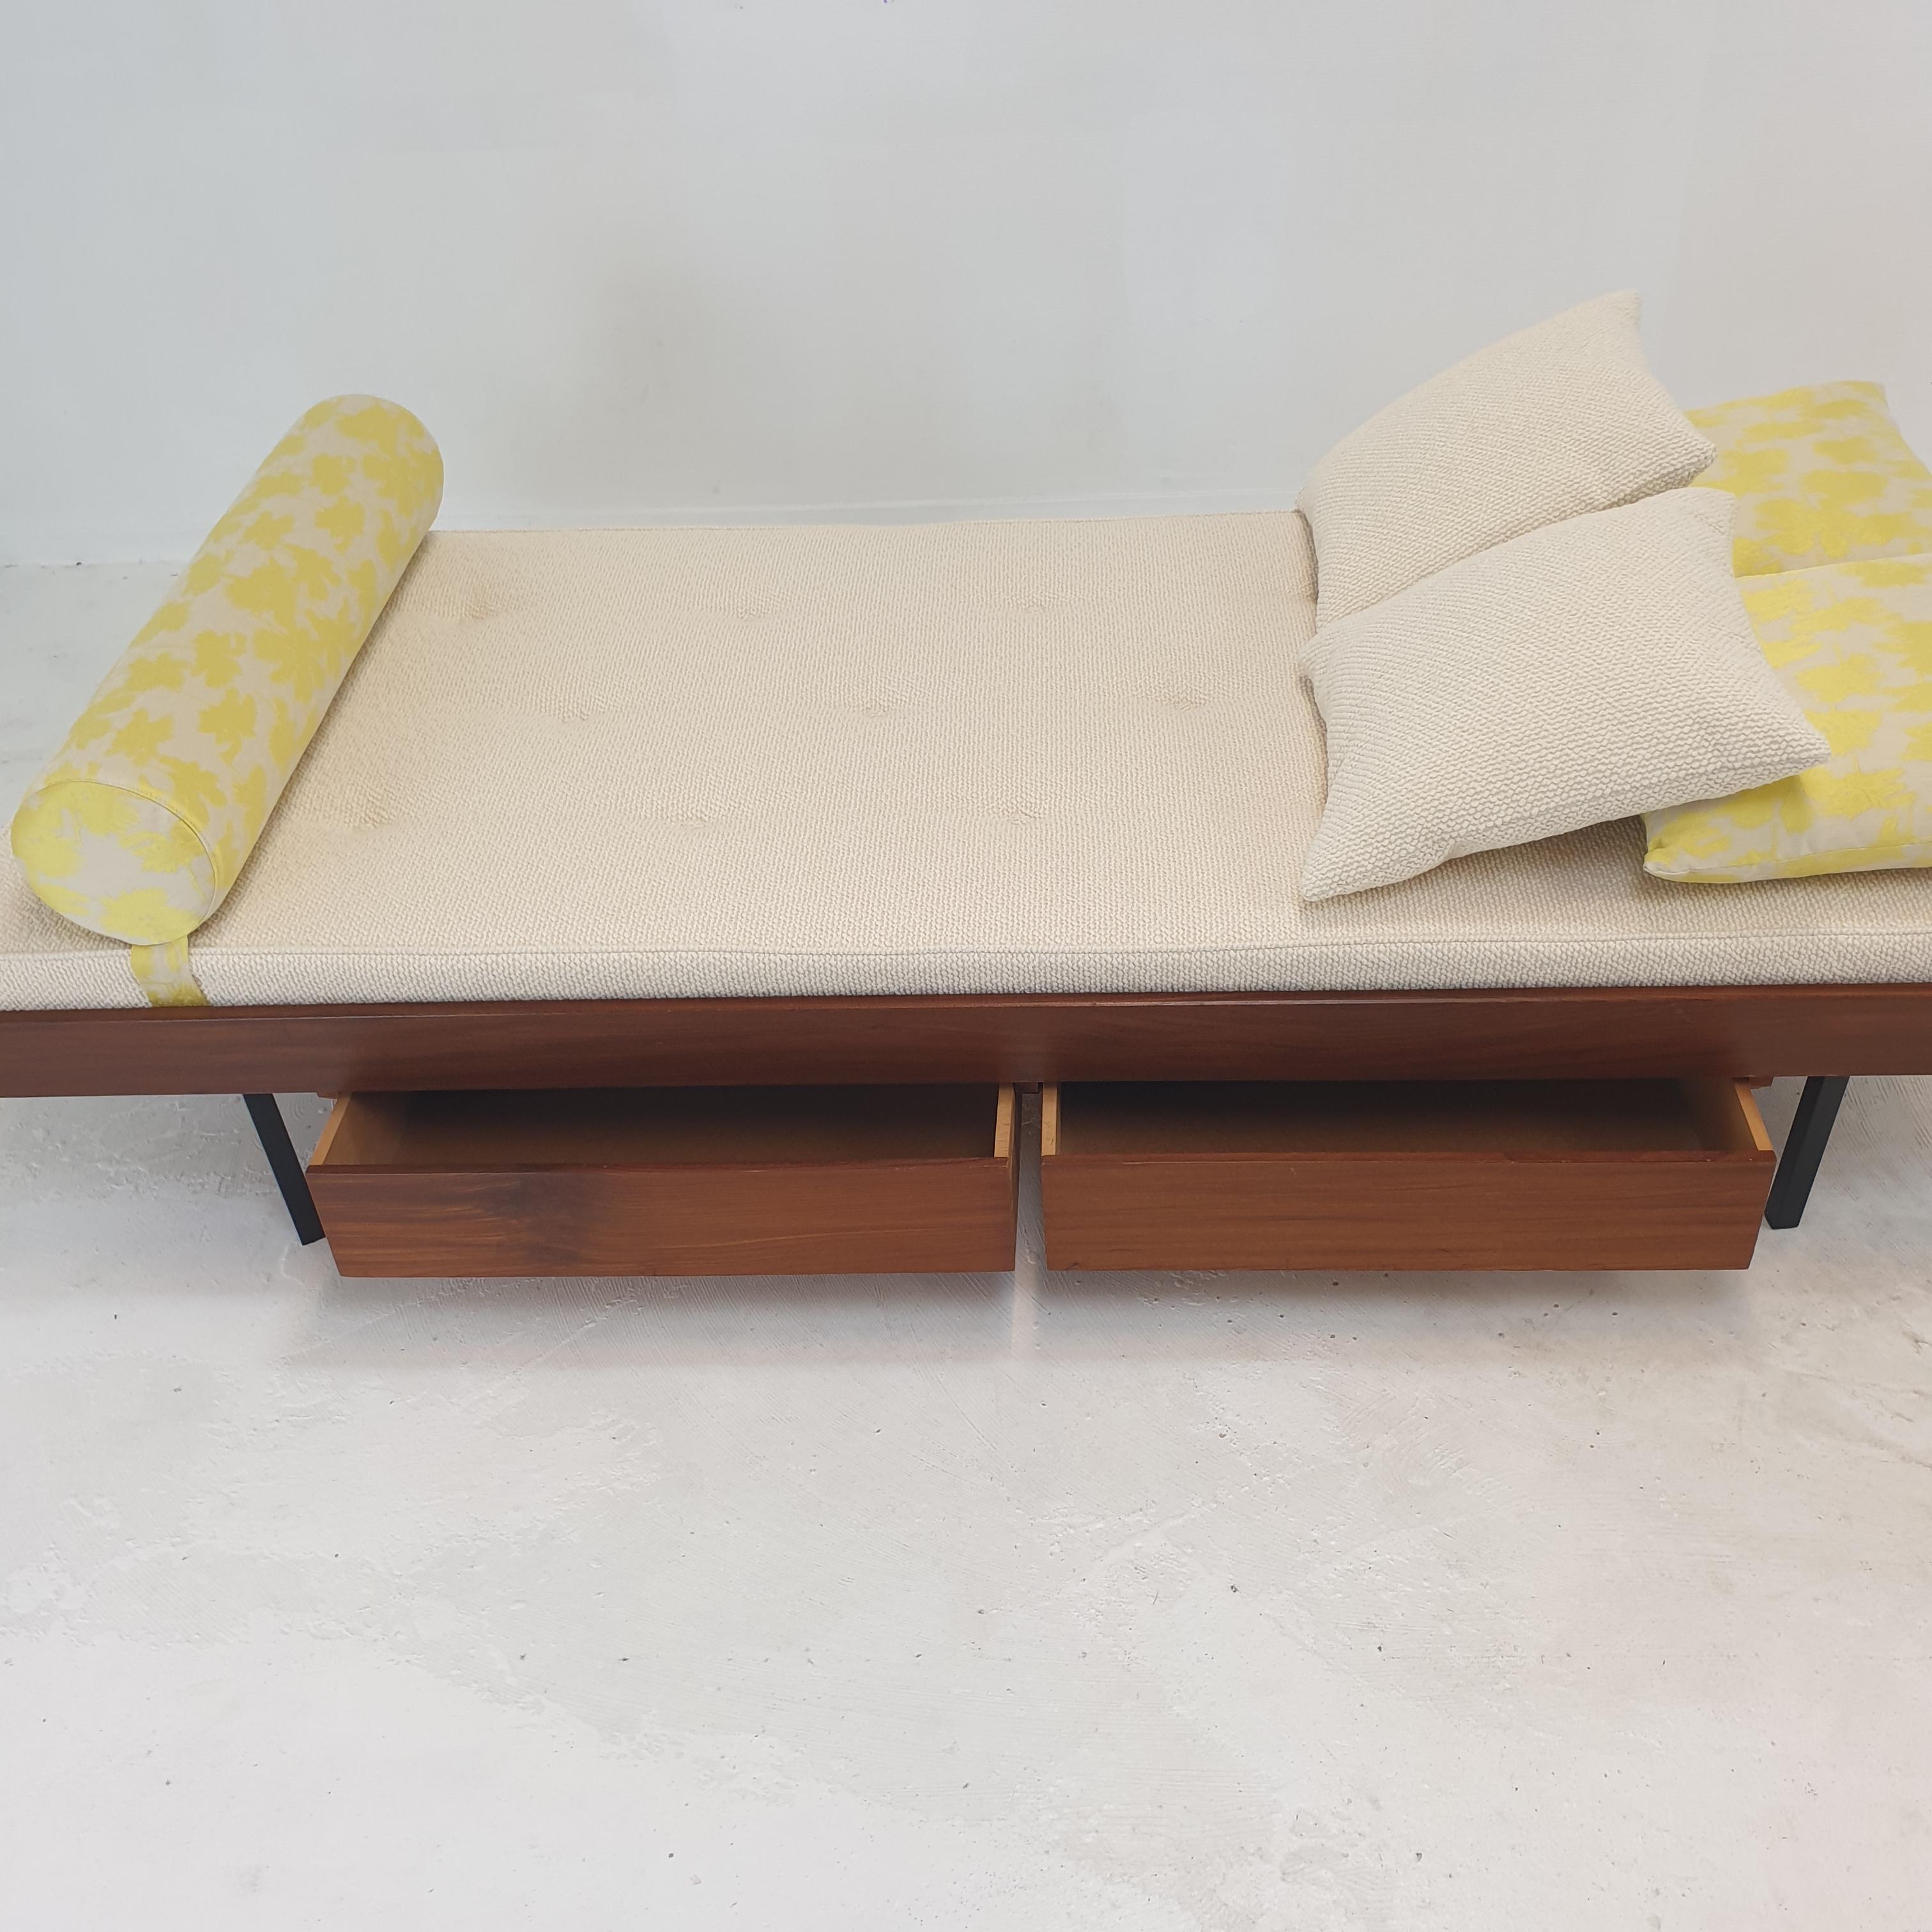 Teak Daybed with Dedar Cushions and Bolster, 1960s For Sale 5